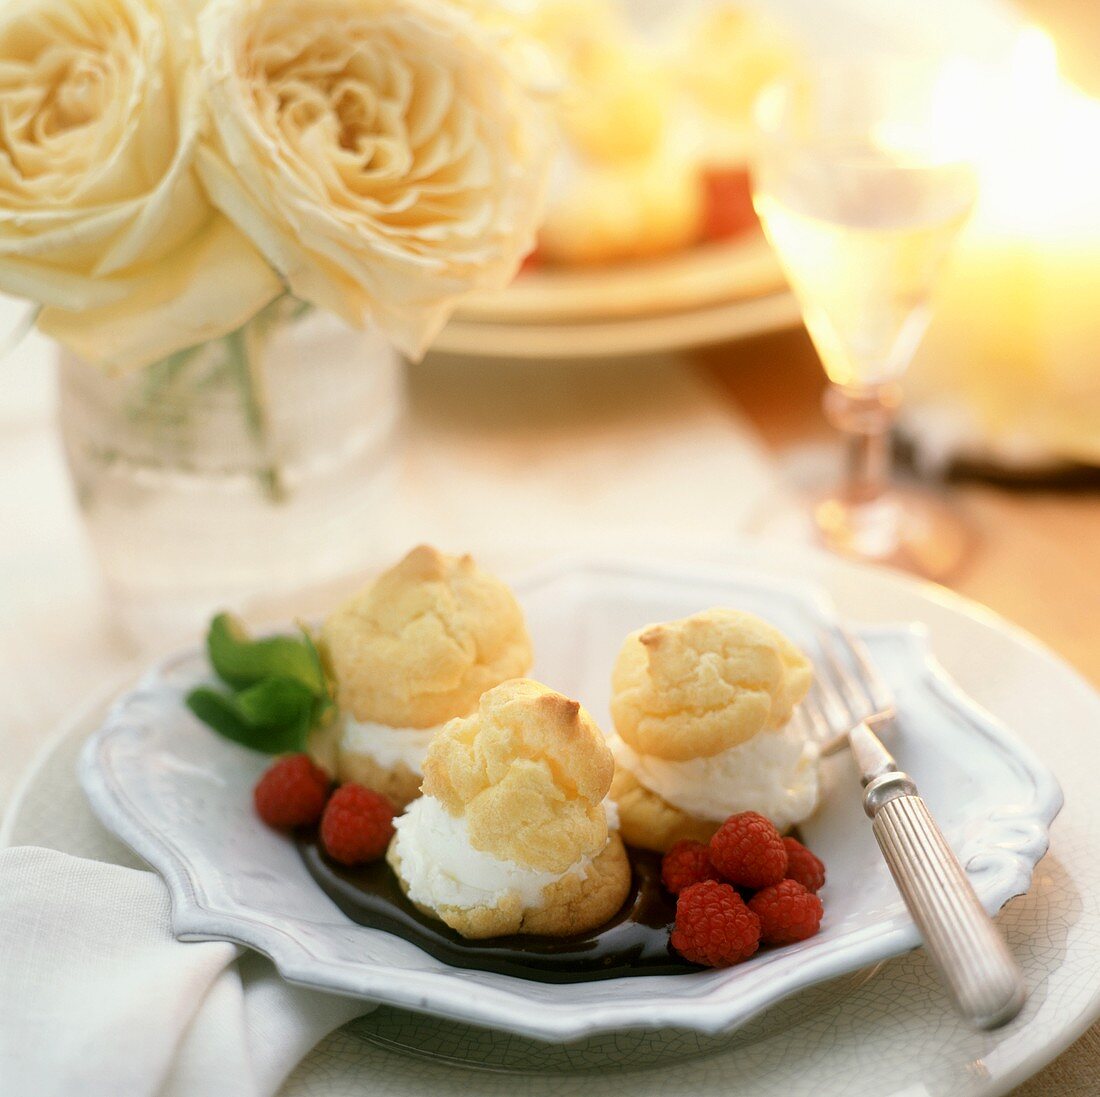 Cream Puffs with Raspberries in Chocolate Sauce